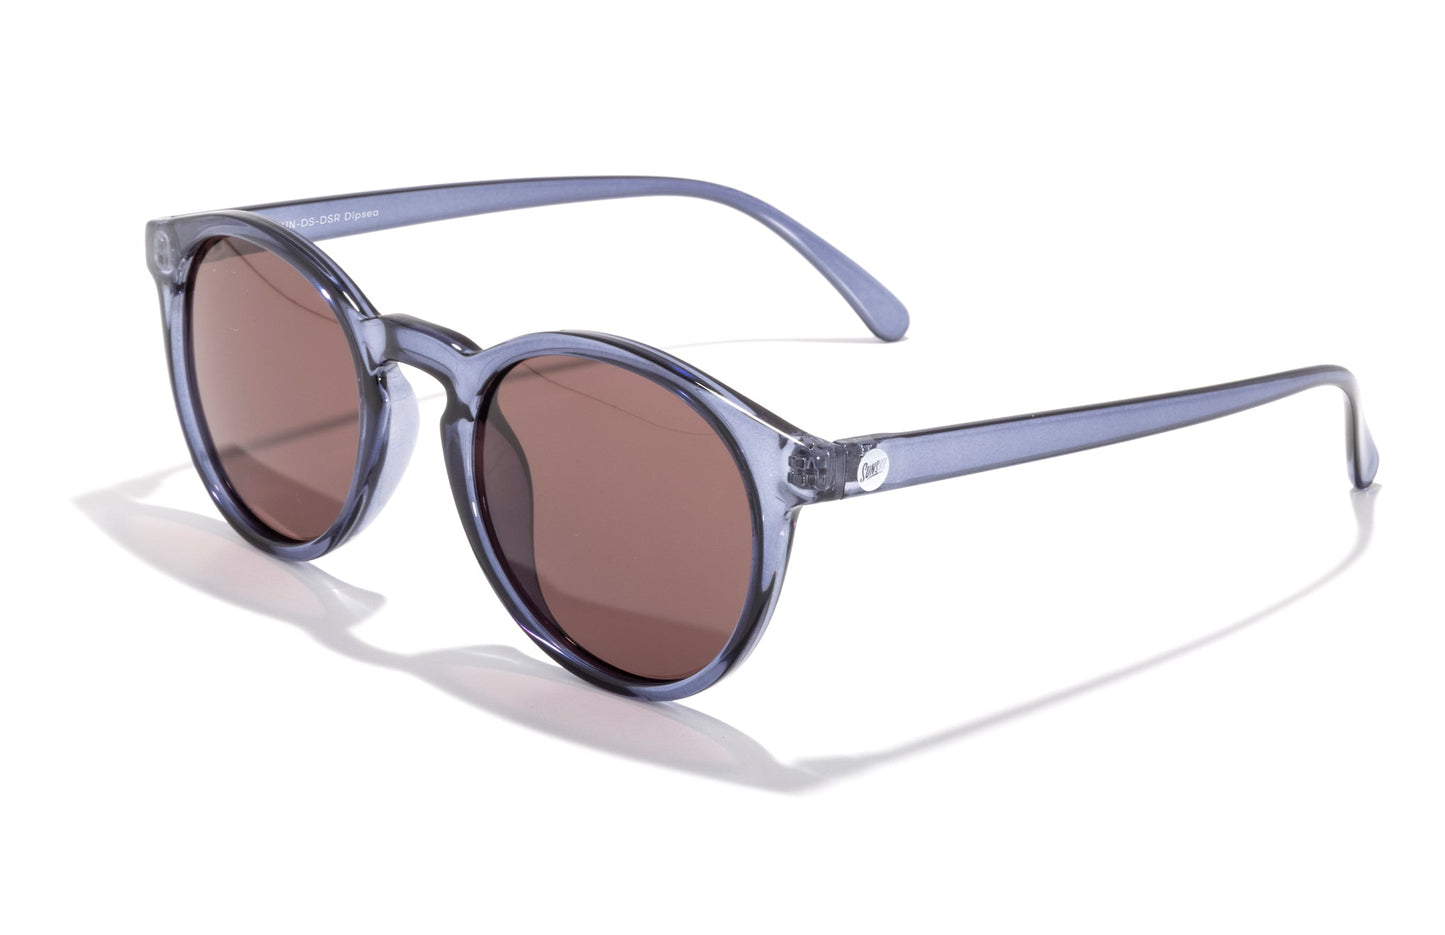 Eco-friendly polarized sunglasses made from recycled plastic. The Dispeas are a medium-coverage, medium-sized frame that works best on small to medium faces. Unisex, and rocked by guys and gals nationwide